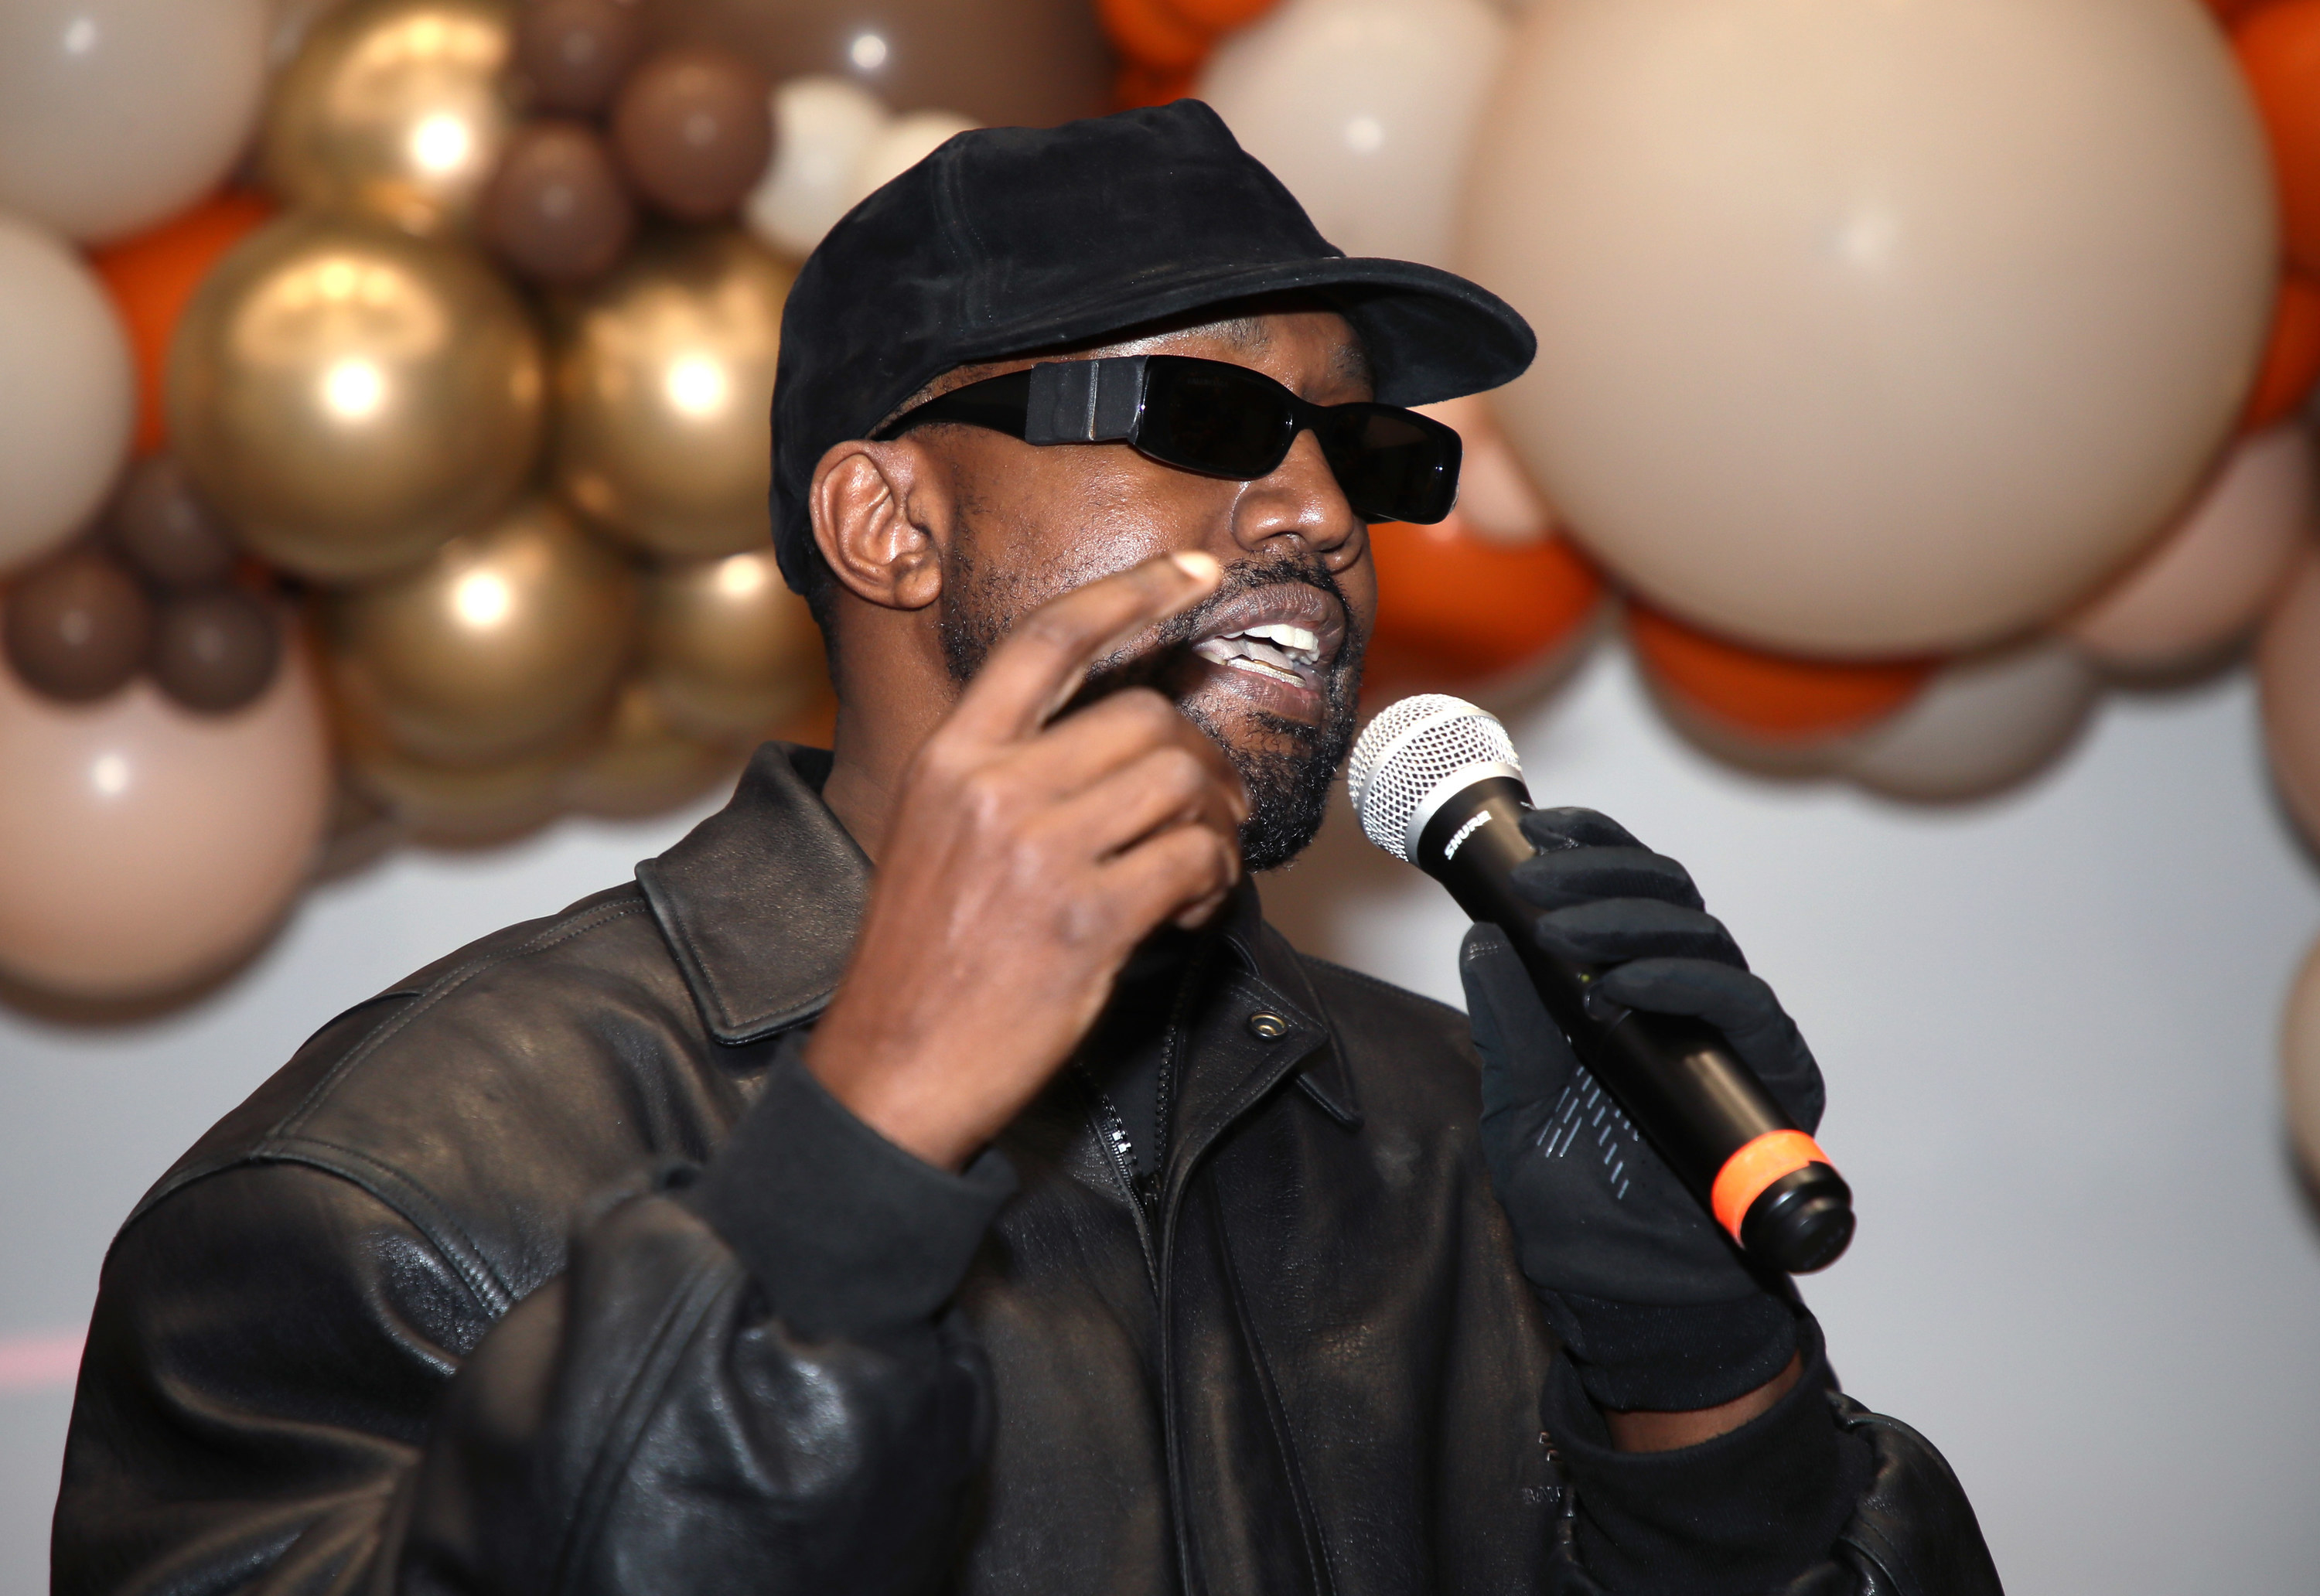 Ye wearing a cap and sunglasses and speaking into a microphone